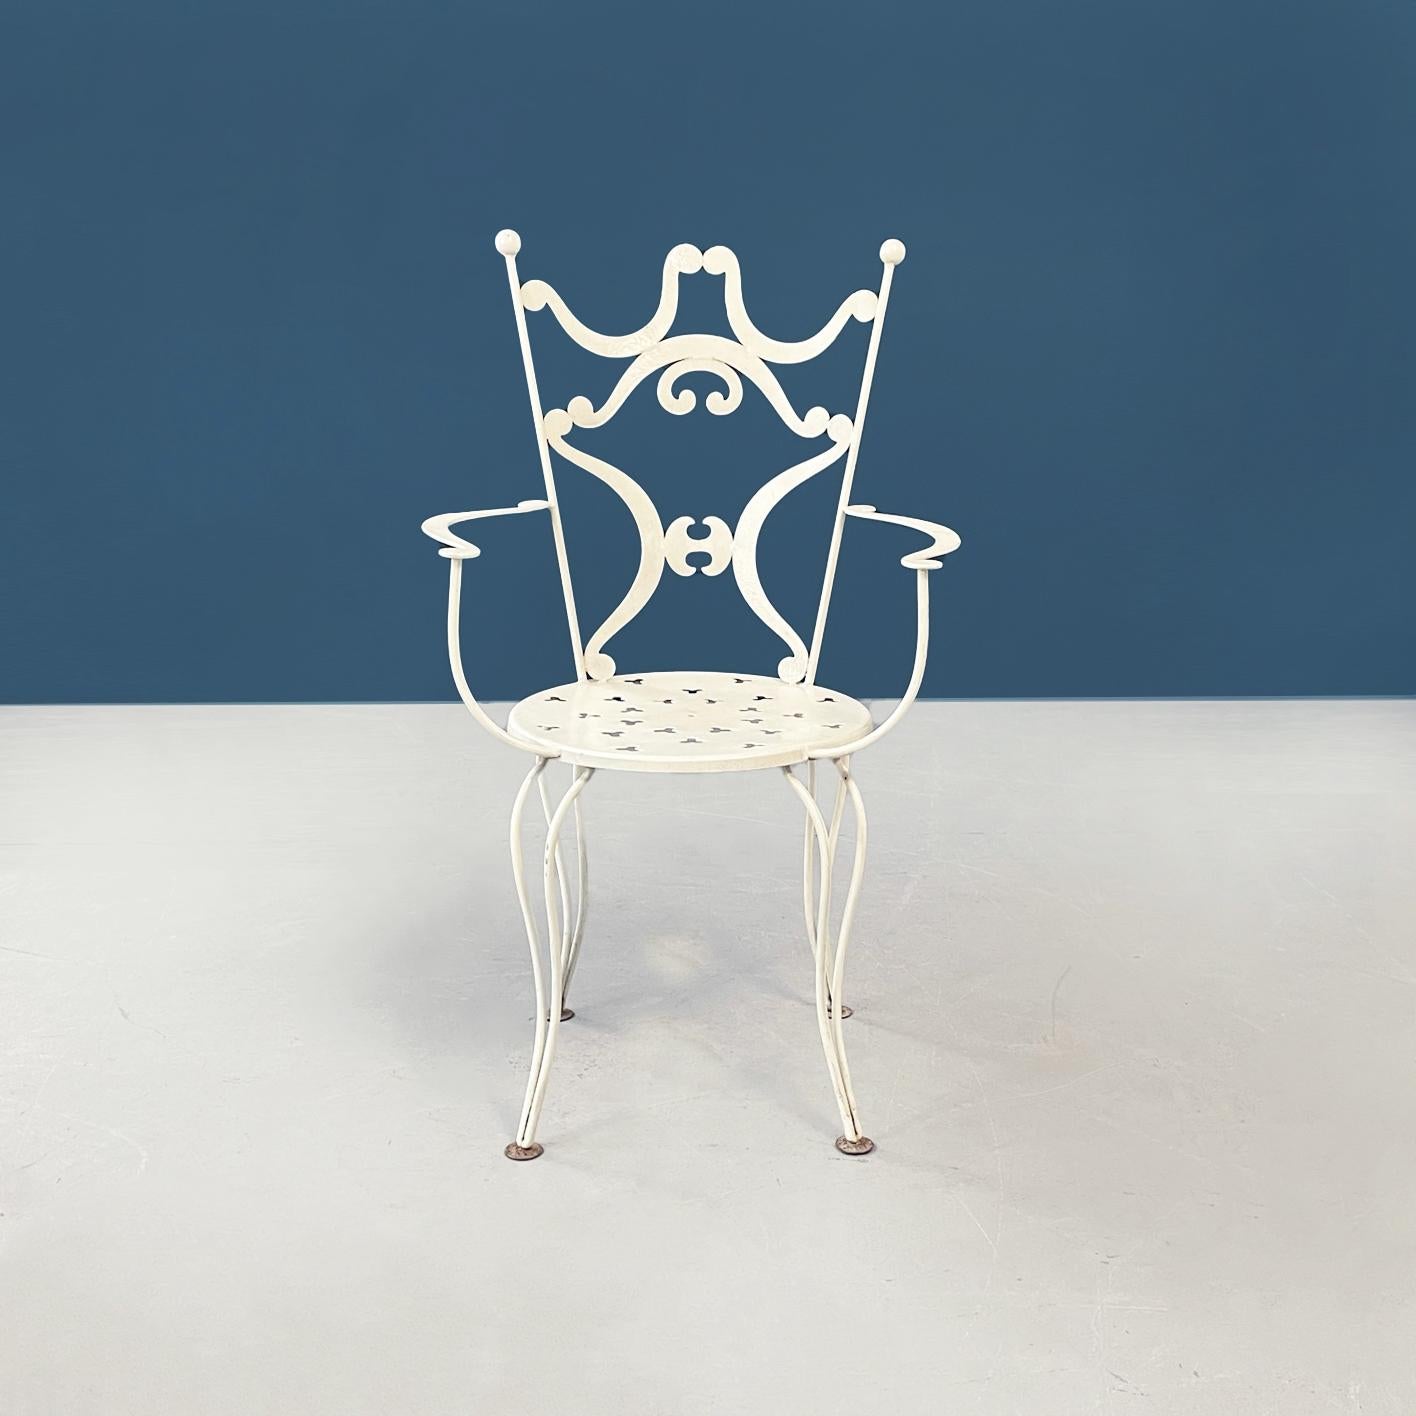 Italian mid-century Garden chairs in white wrought iron finely worked, 1960s
Garden set consisting of 4 chairs and a table. The outdoor chairs are in cream white painted wrought iron. The round seat is perforated. The back is slightly curved and